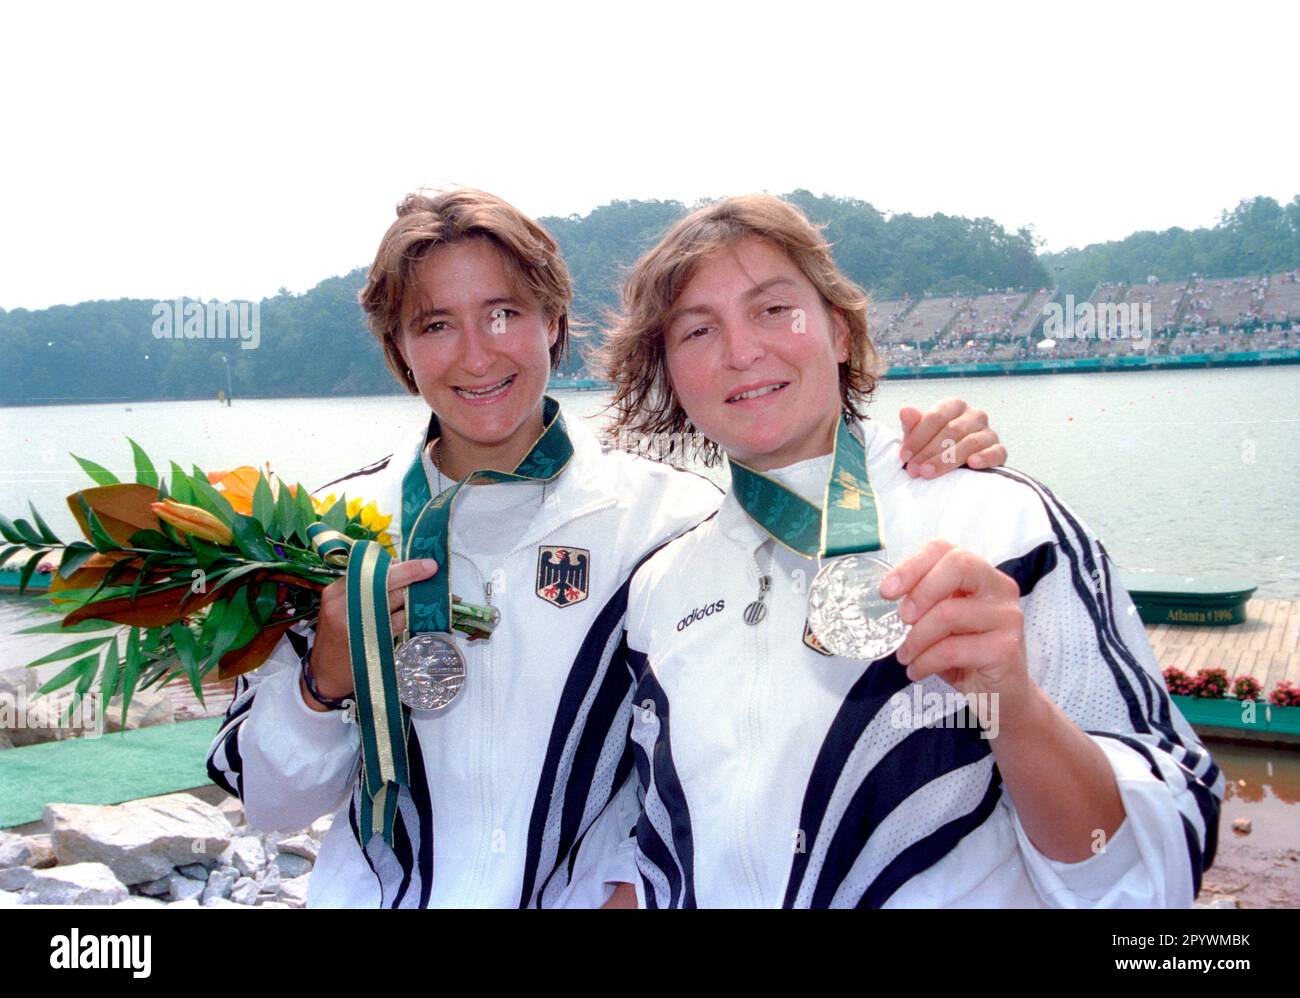 Olympic Games 1996 in Atlanta Canoe 2-man kayak women Ramona Portwich and Birgit Fischer (Germany) show their silver medals 04.08.1996 [automated translation] Stock Photo